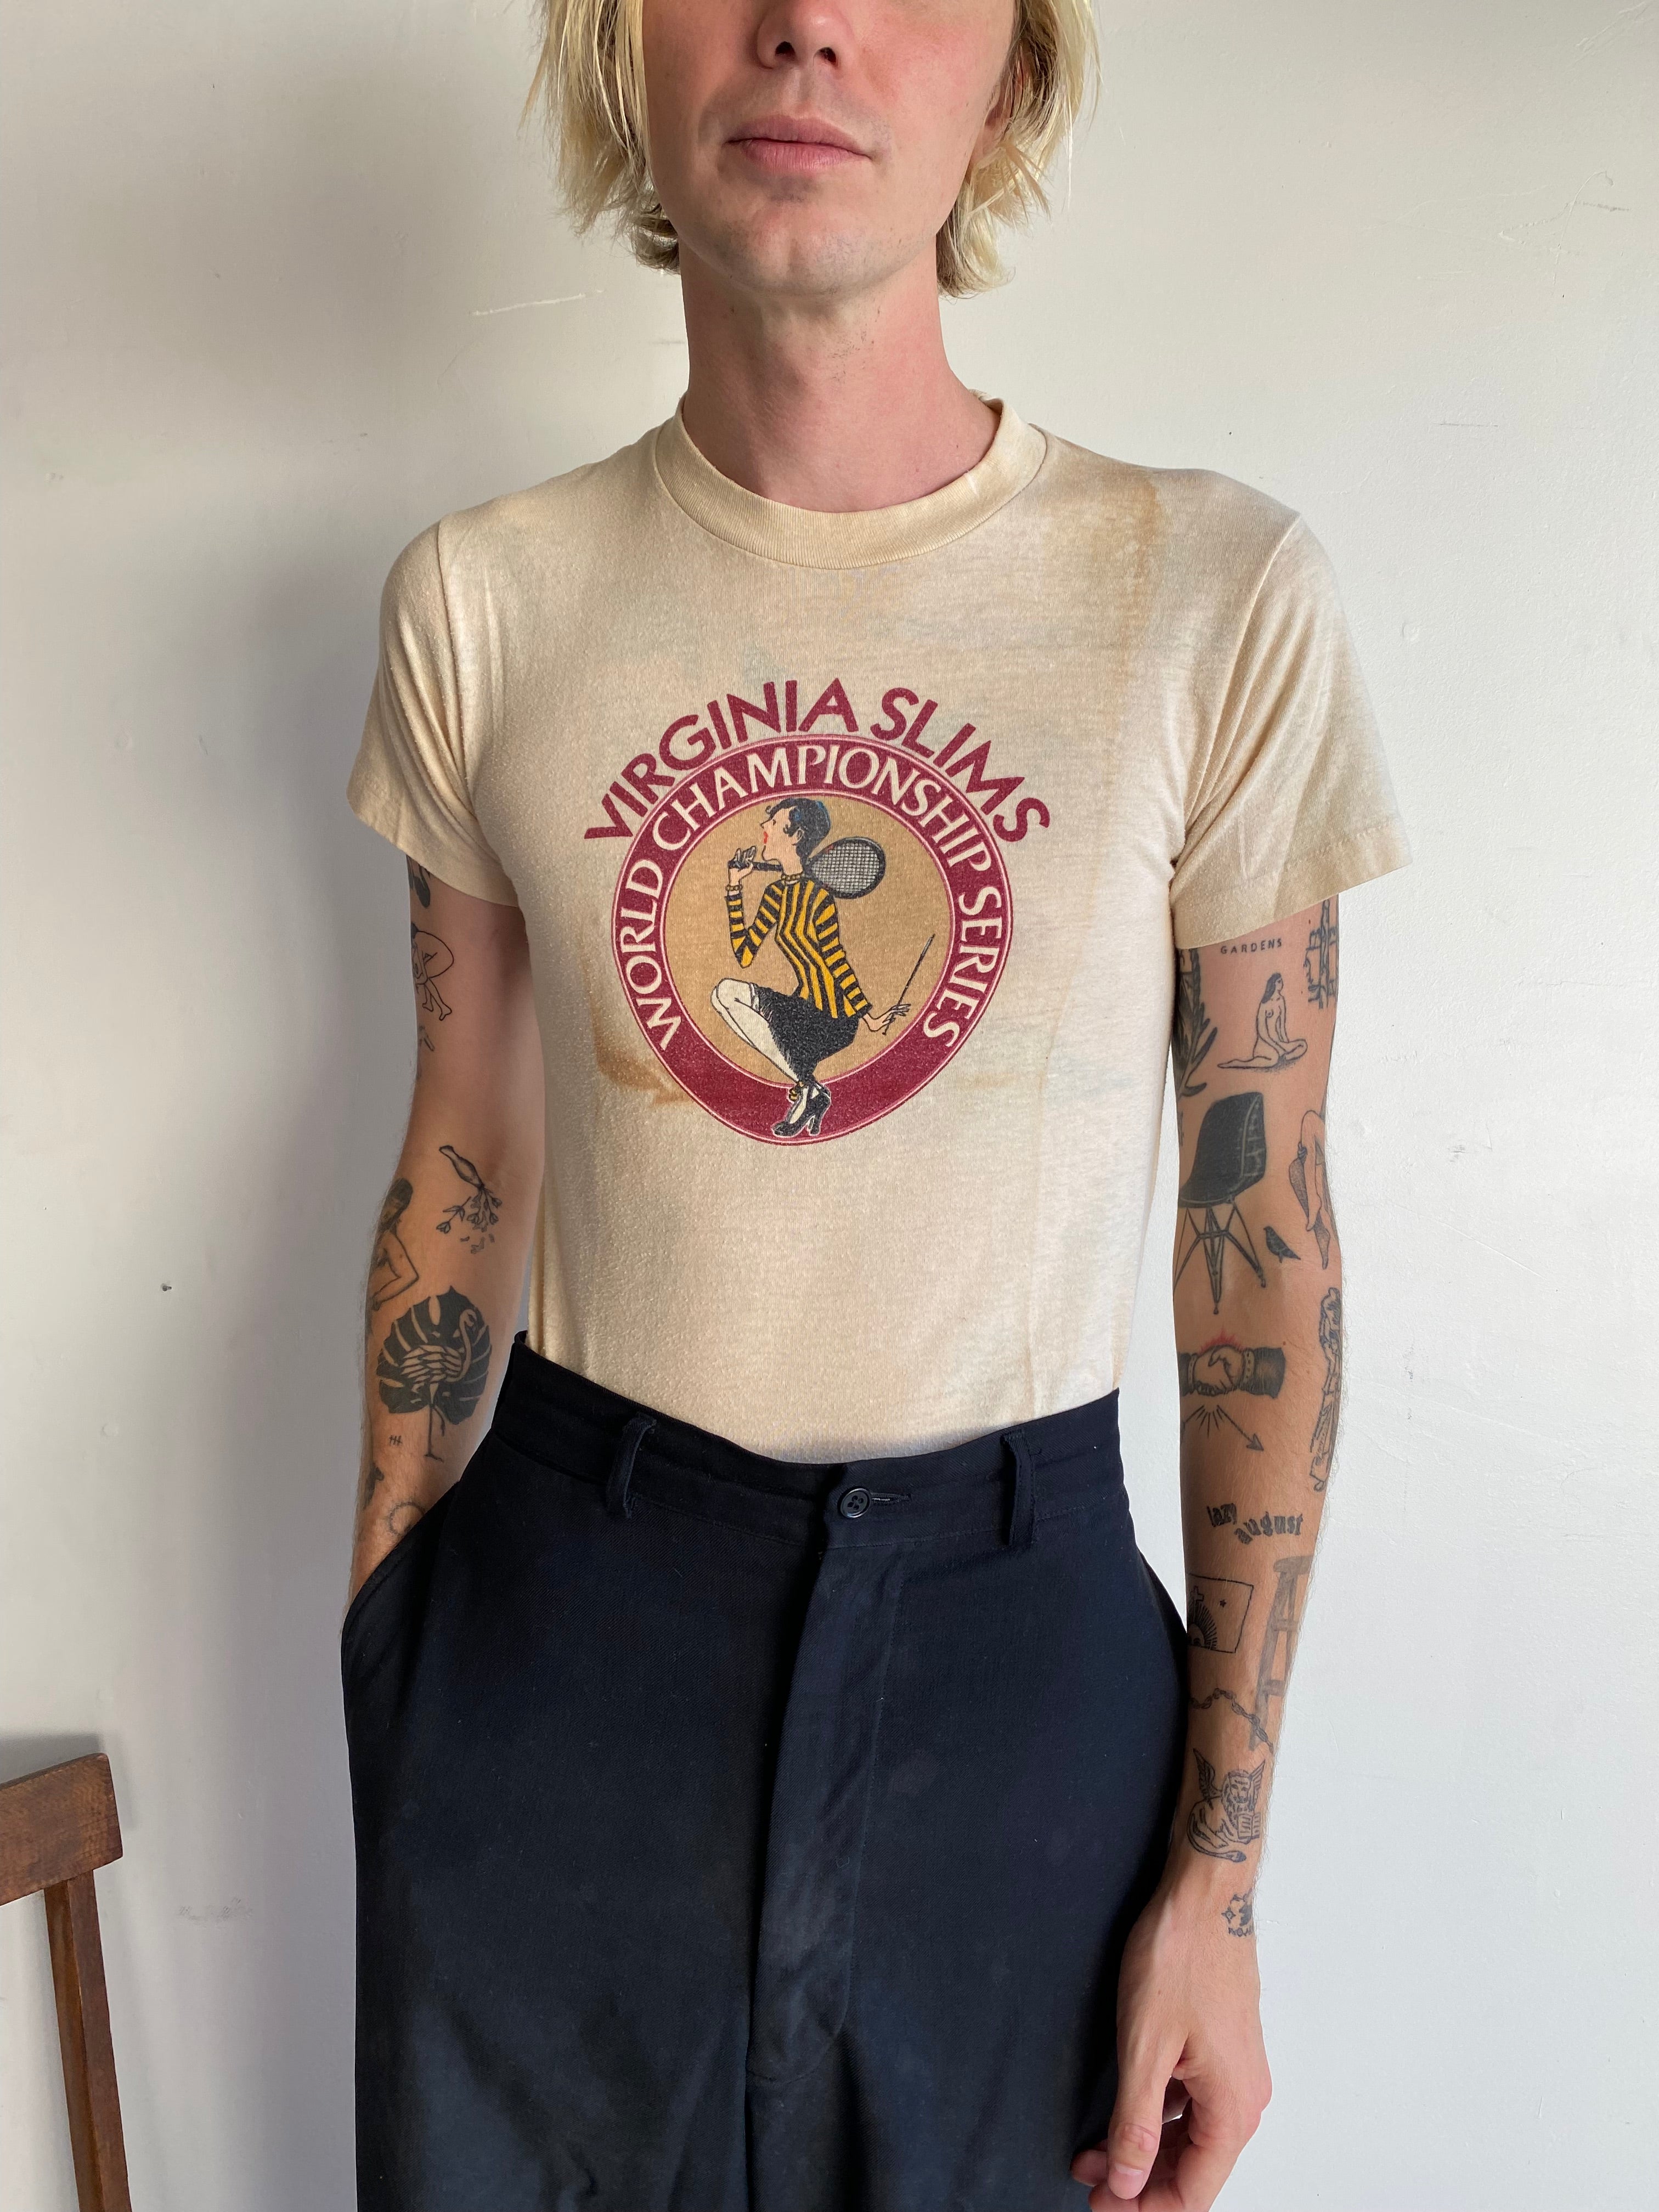 1980s Stained Virginia Slims T-Shirt (S)